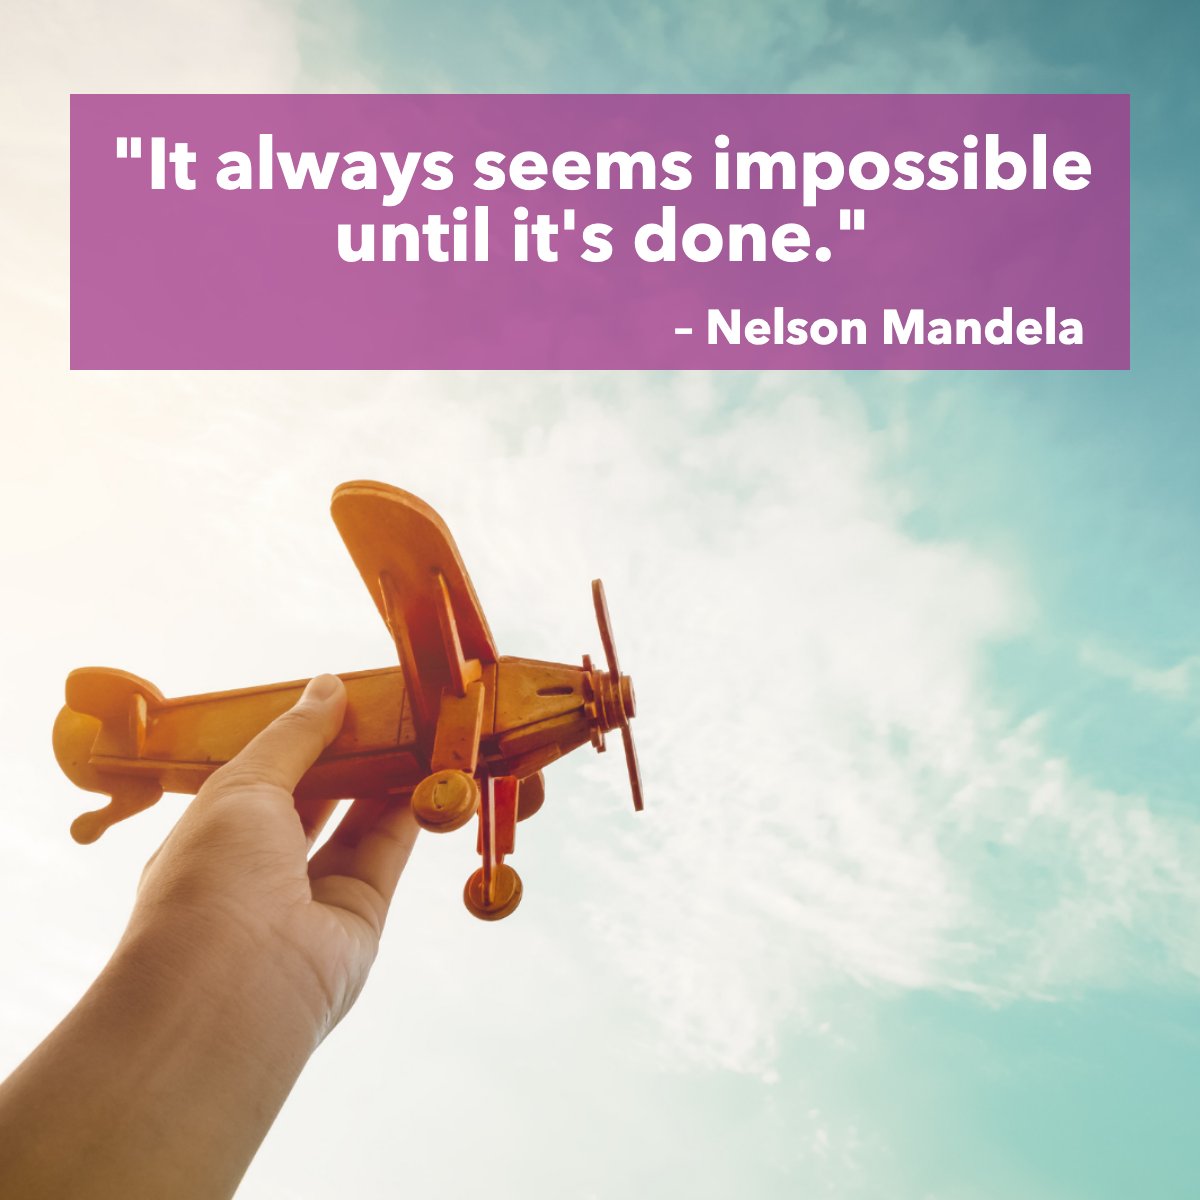 'It always seems impossible until it's done.' 
– Nelson Mandela

What big things are you taking on this week?

#airplane #toyairplane #impossible #fly #quote #inspirational #sky #nelsonmandela
 #veteranhomebuyers #militaryhomebuyers #veteransellinghome